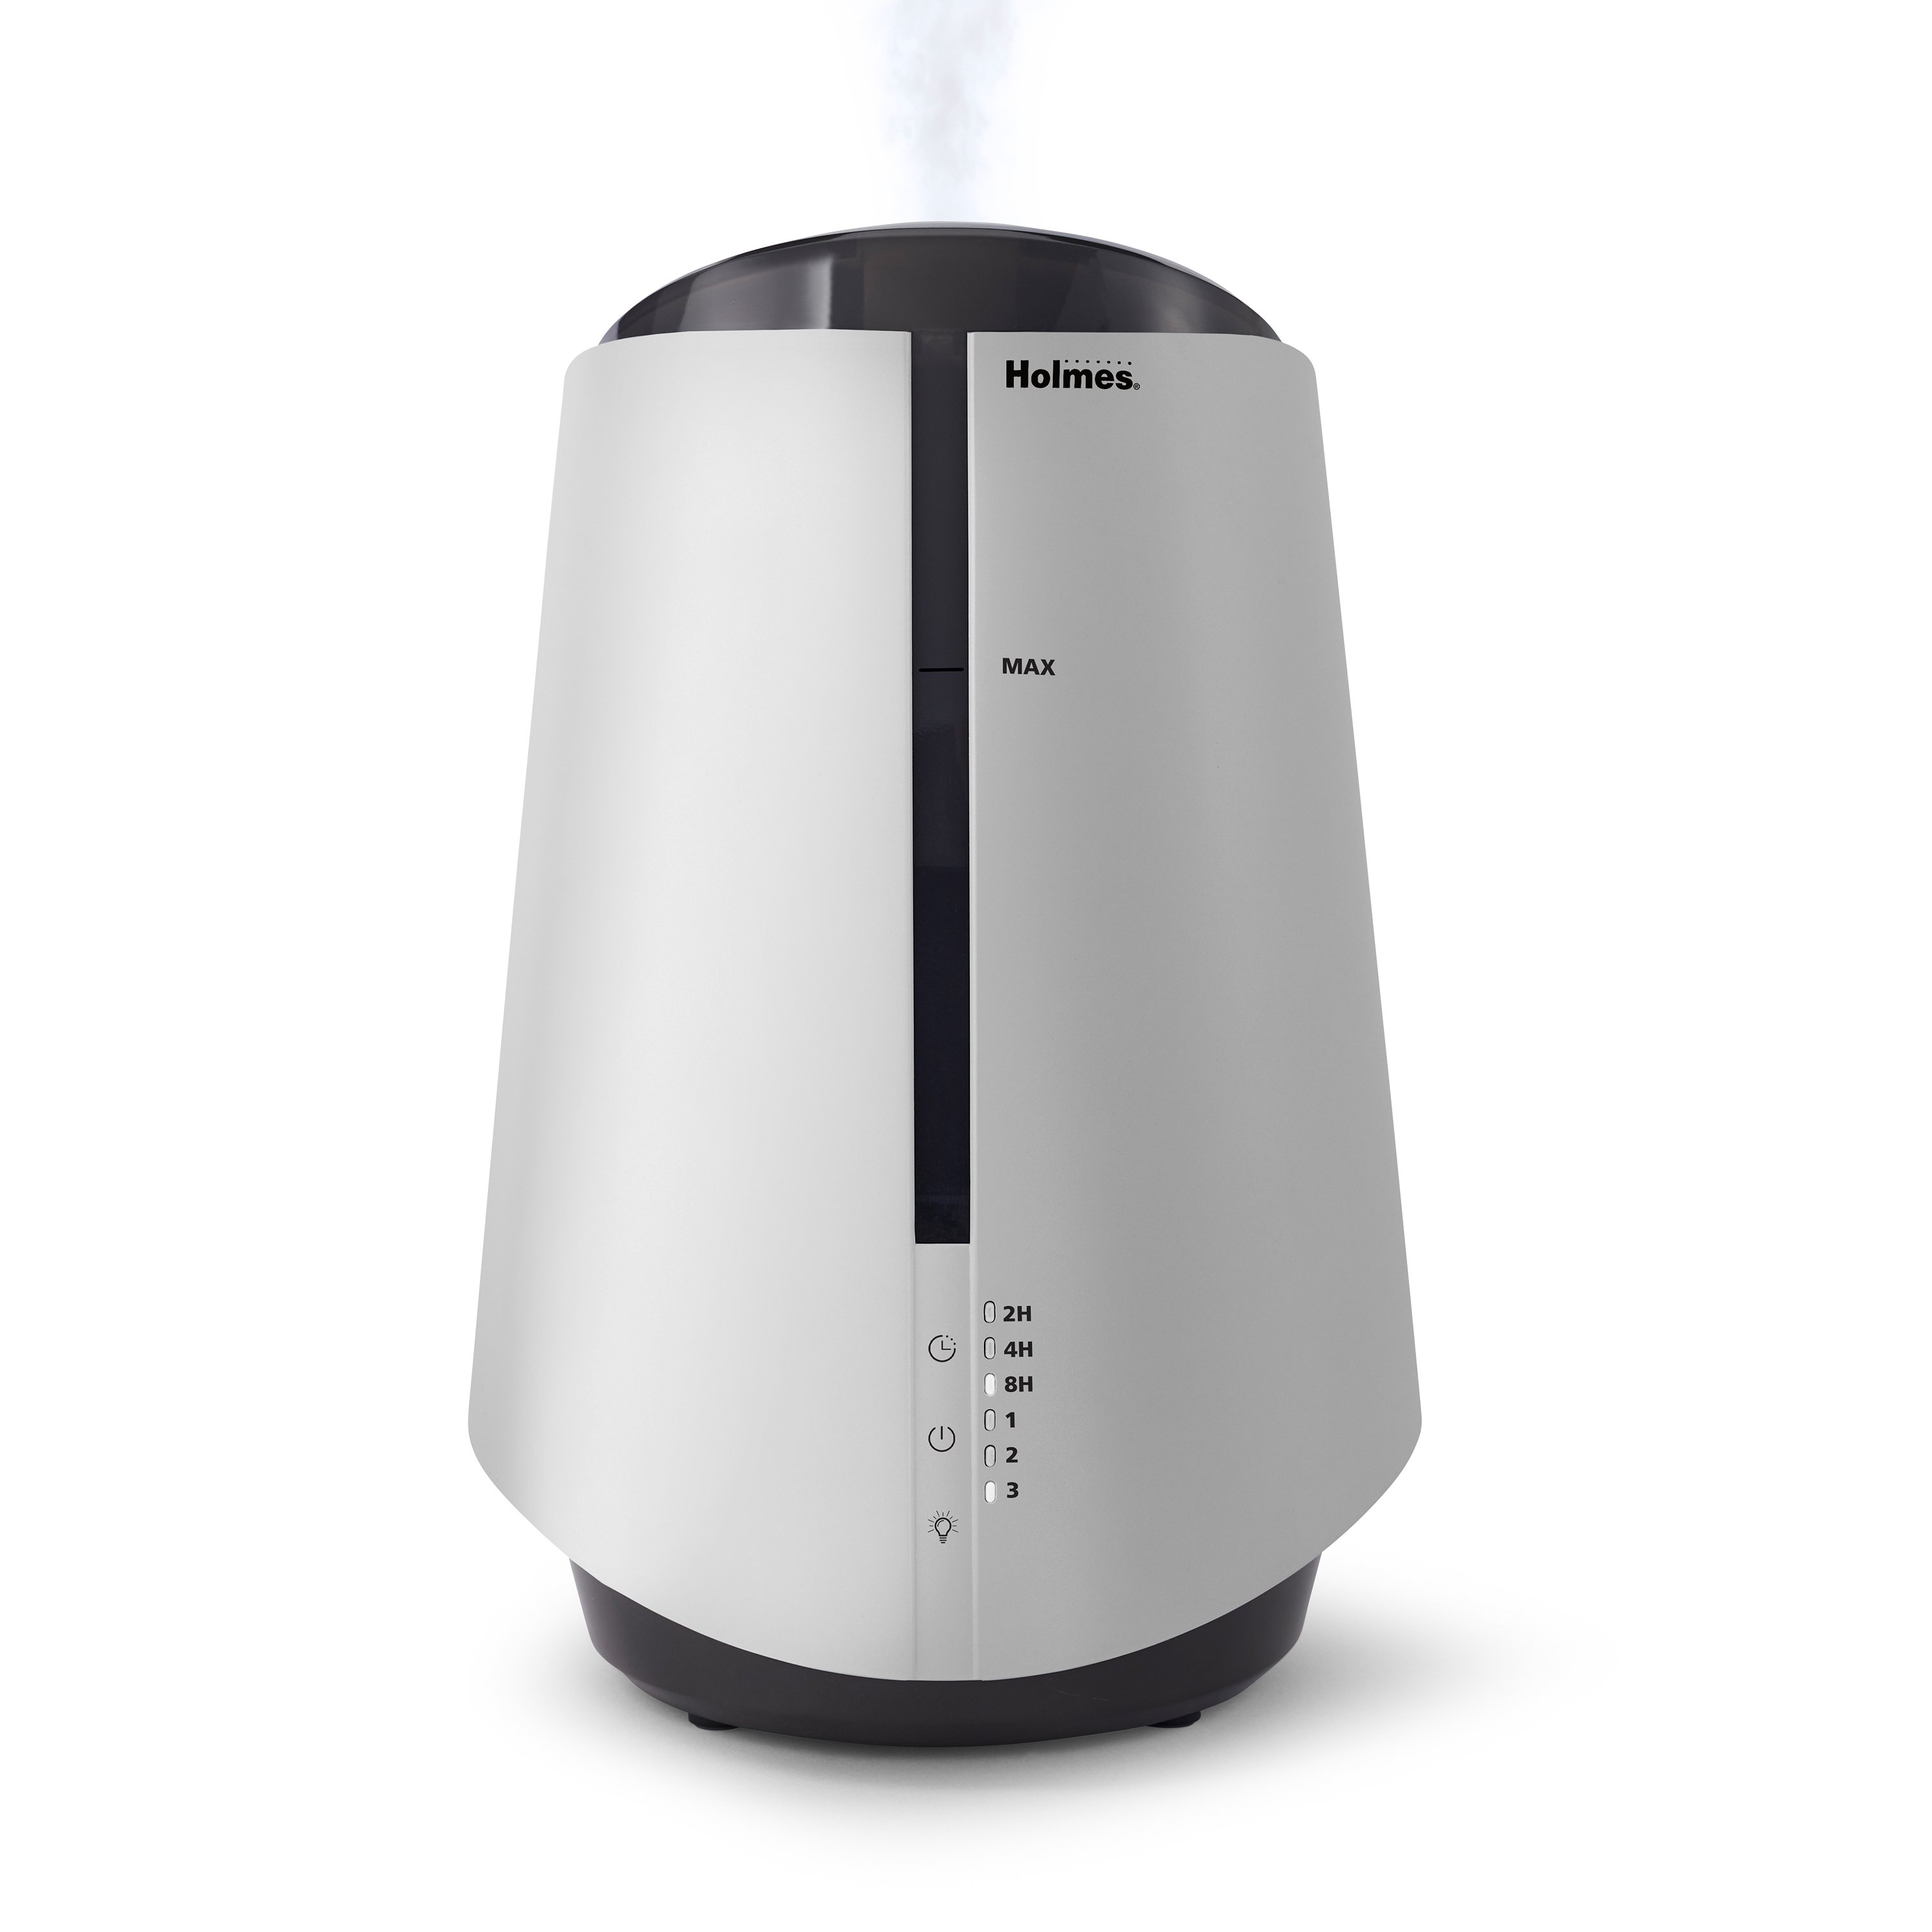 What Are the Benefits of a Humidifier for Your Home? - Molekule